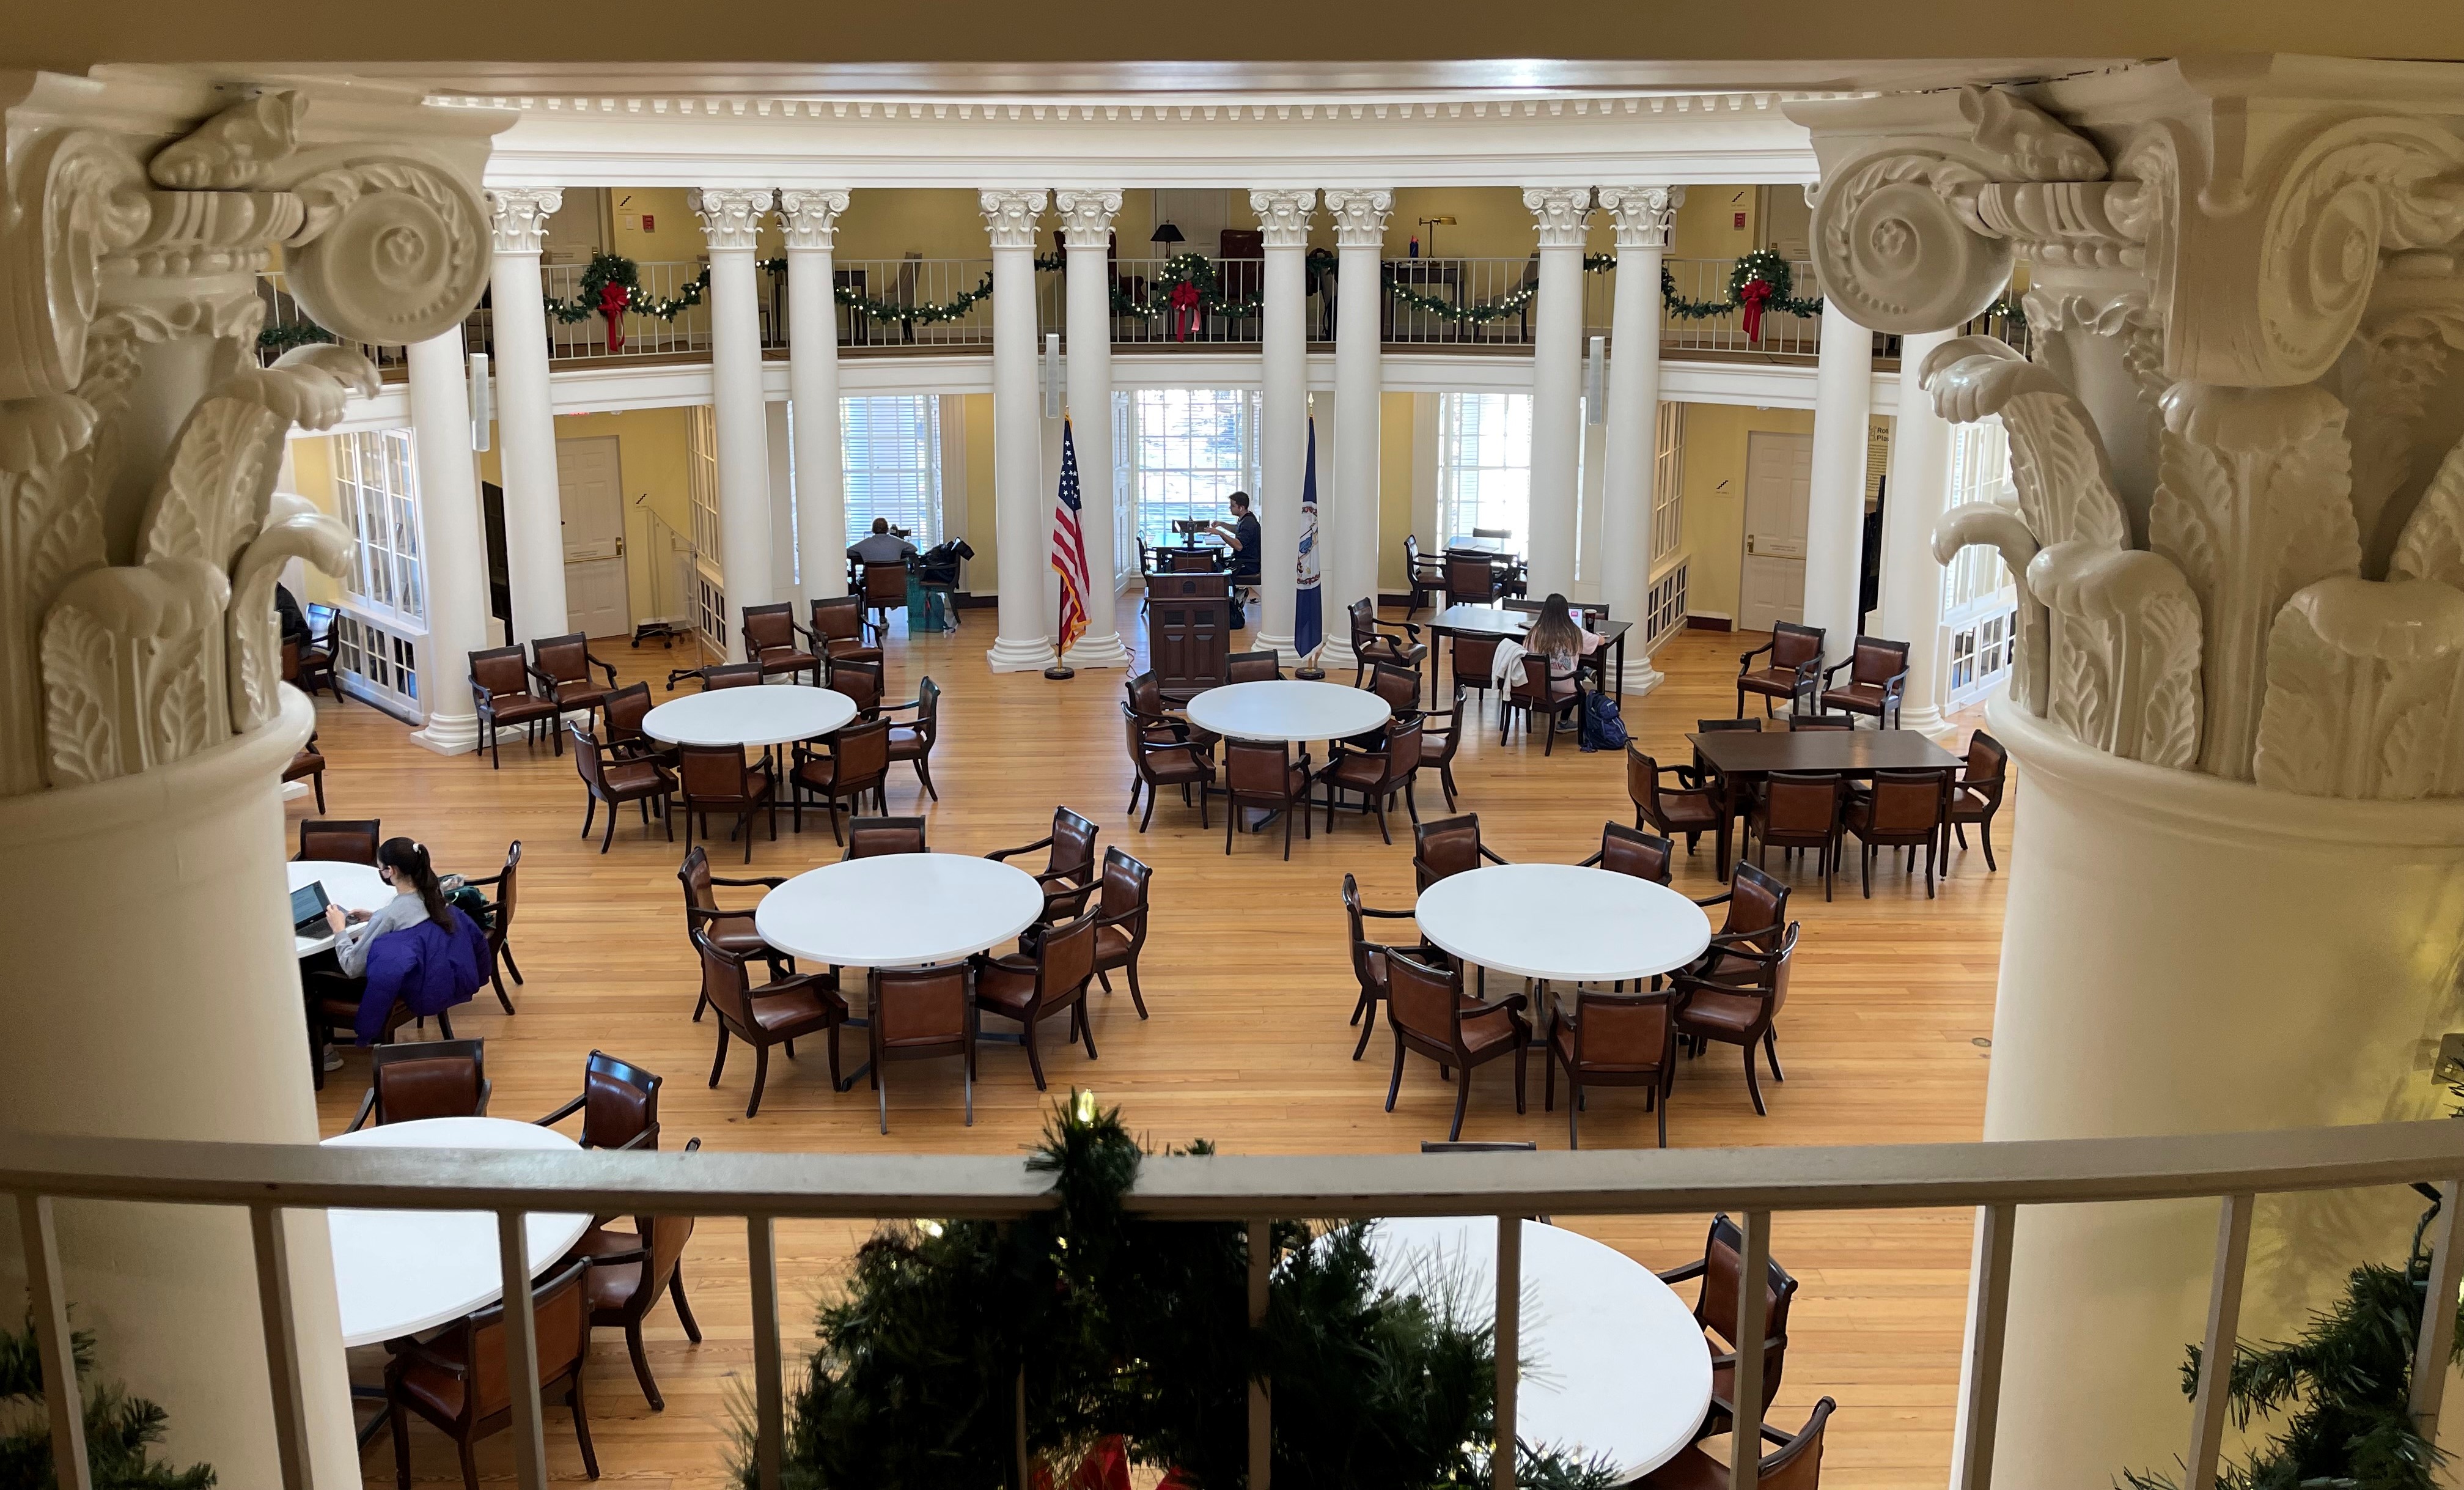 students studying for exams in the Dome Room, decorated for the holidays